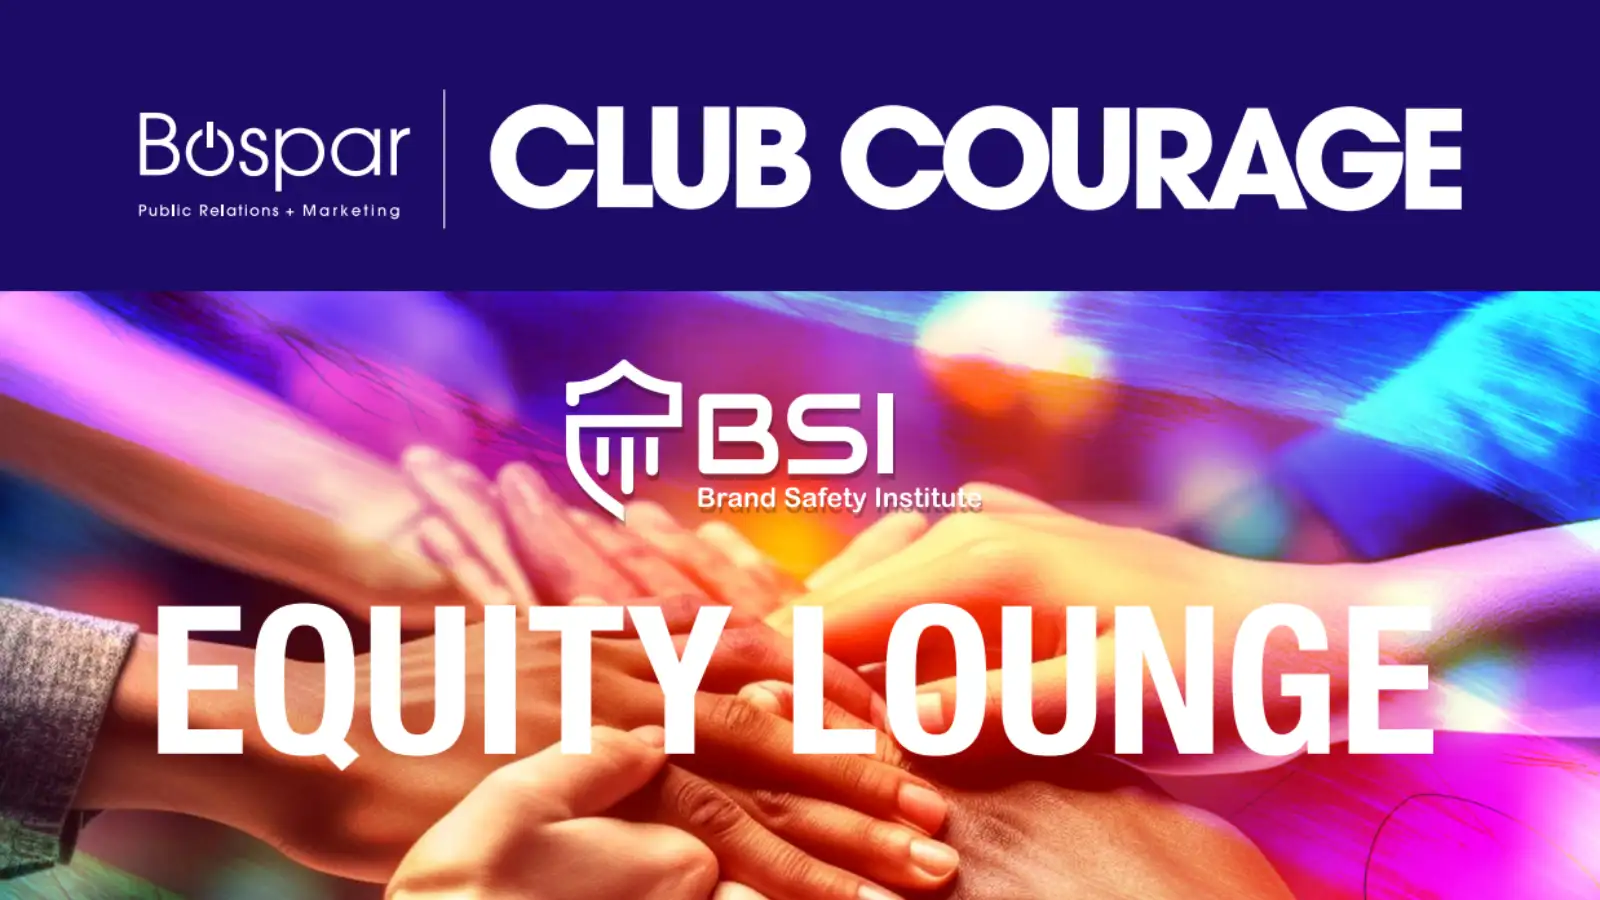 Club Courage